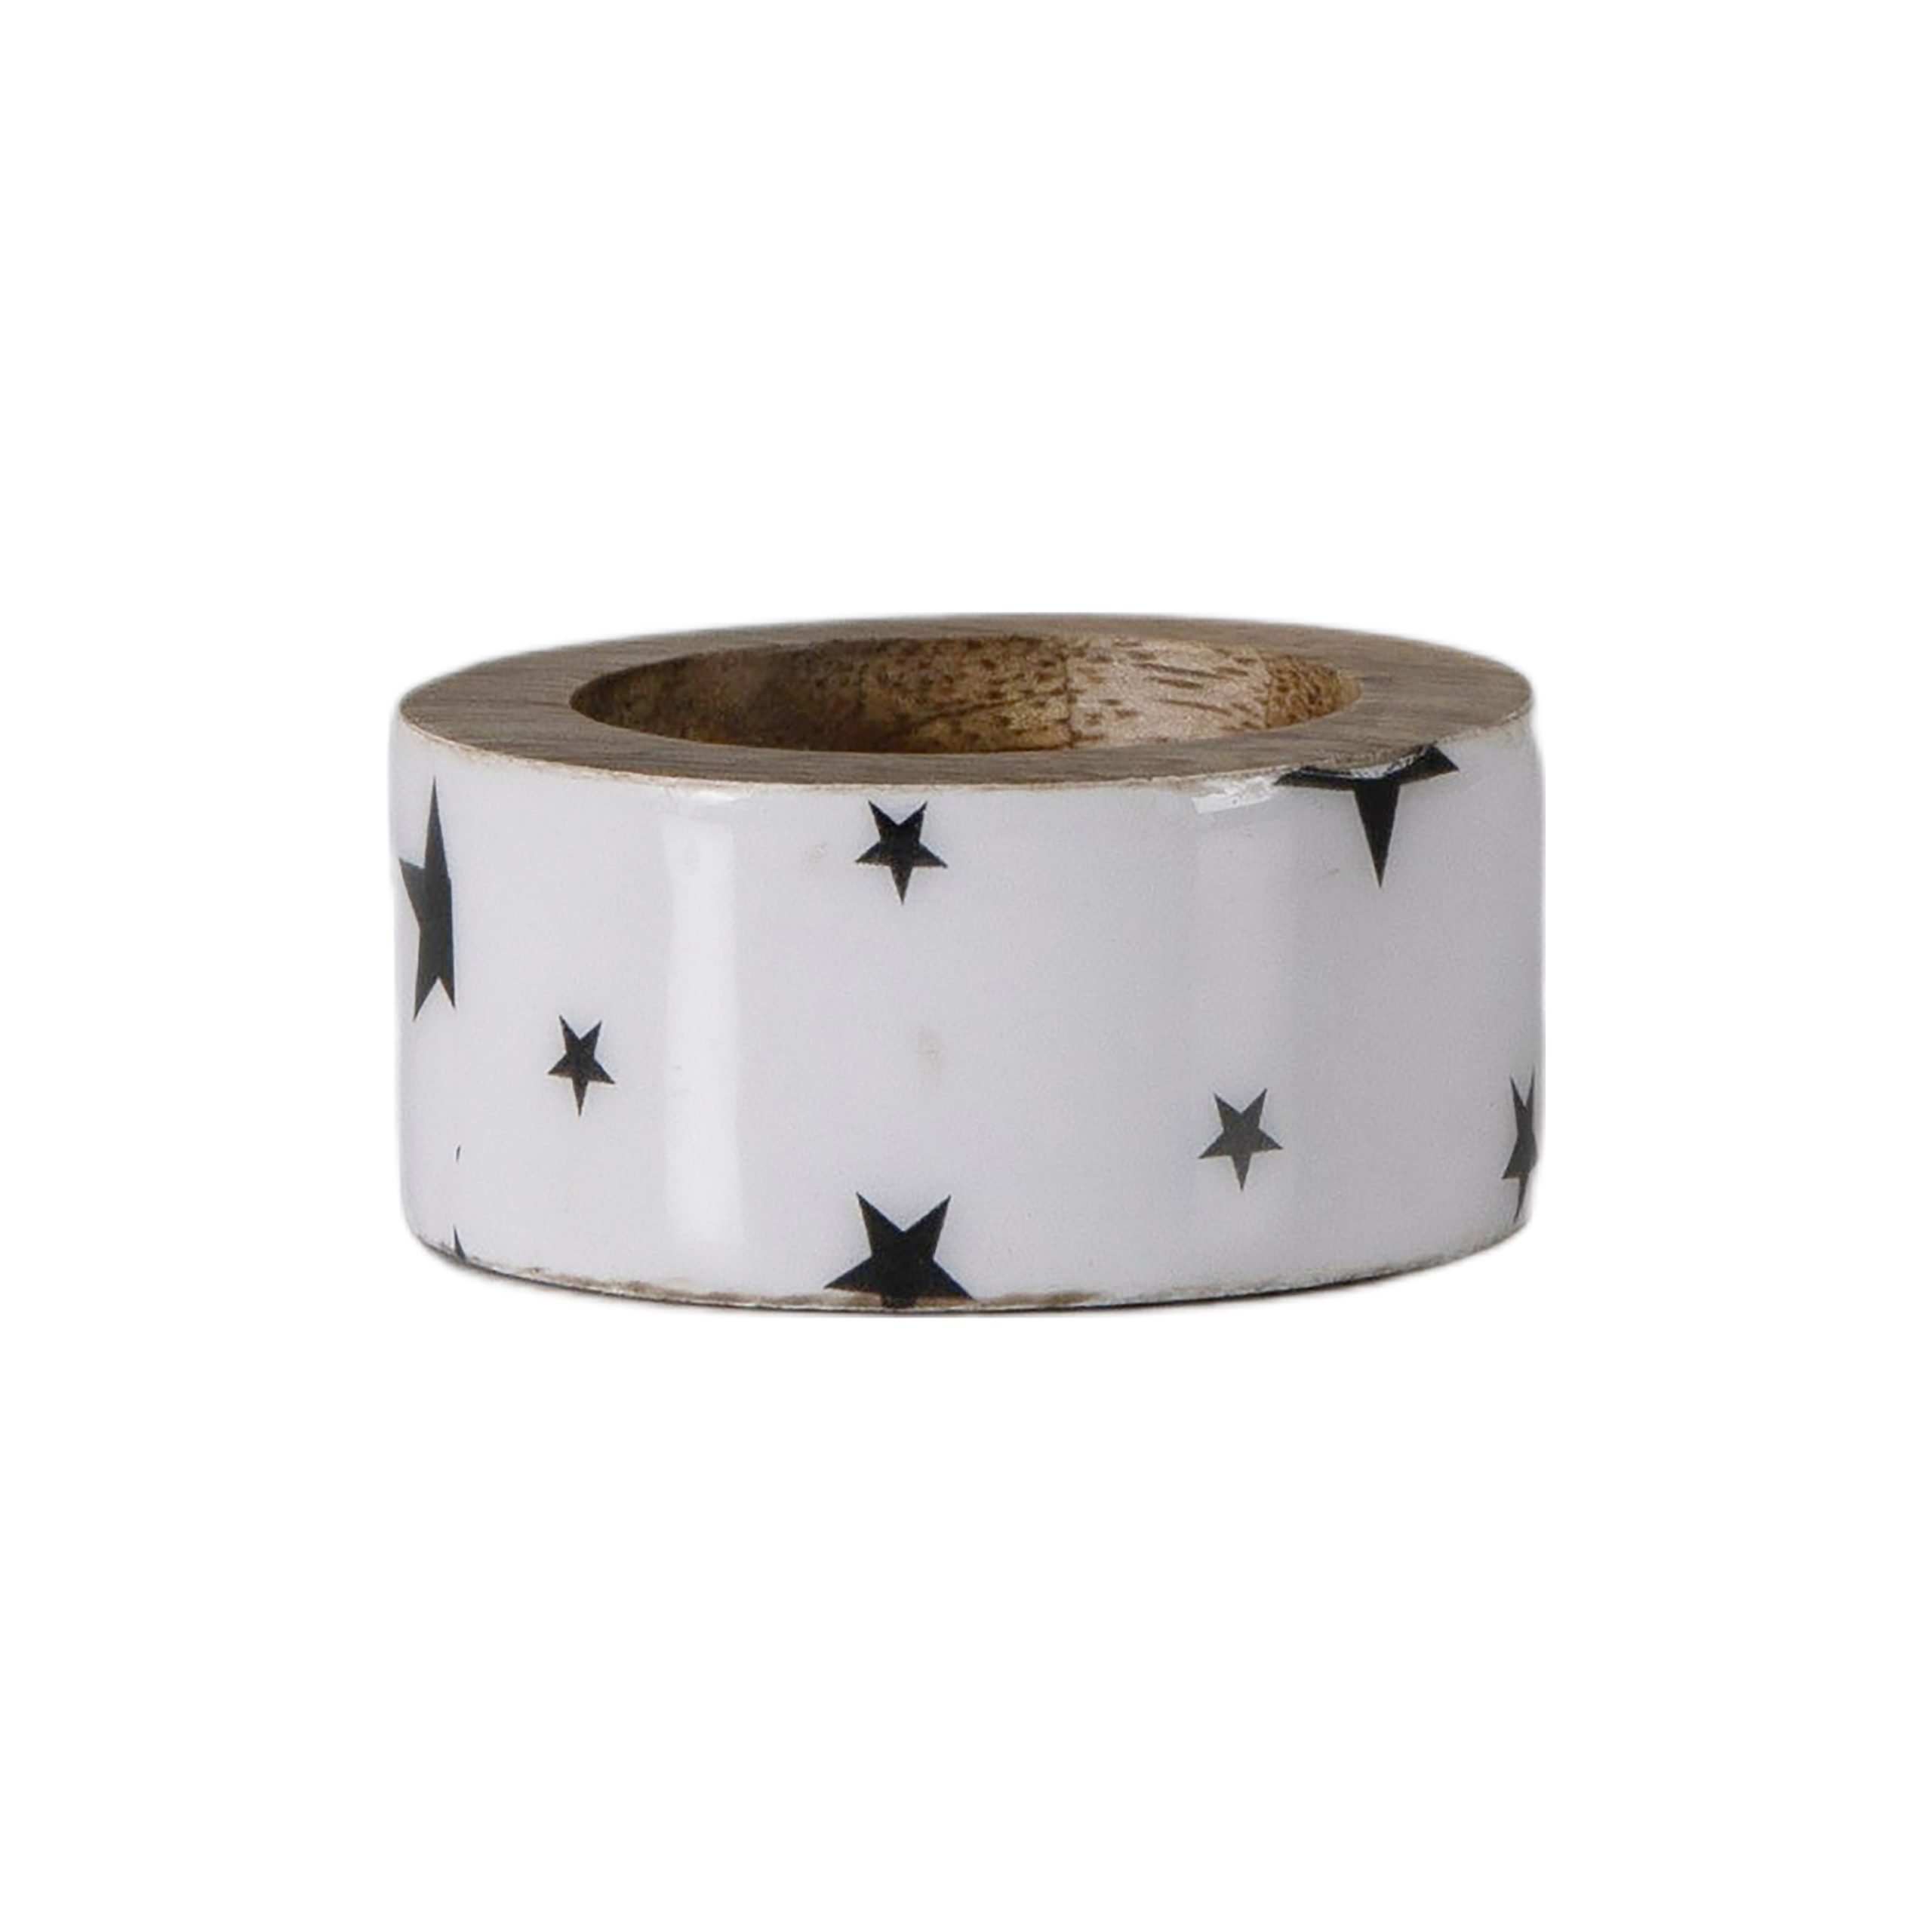 Gallery Direct Starry Napkin Rings Set of